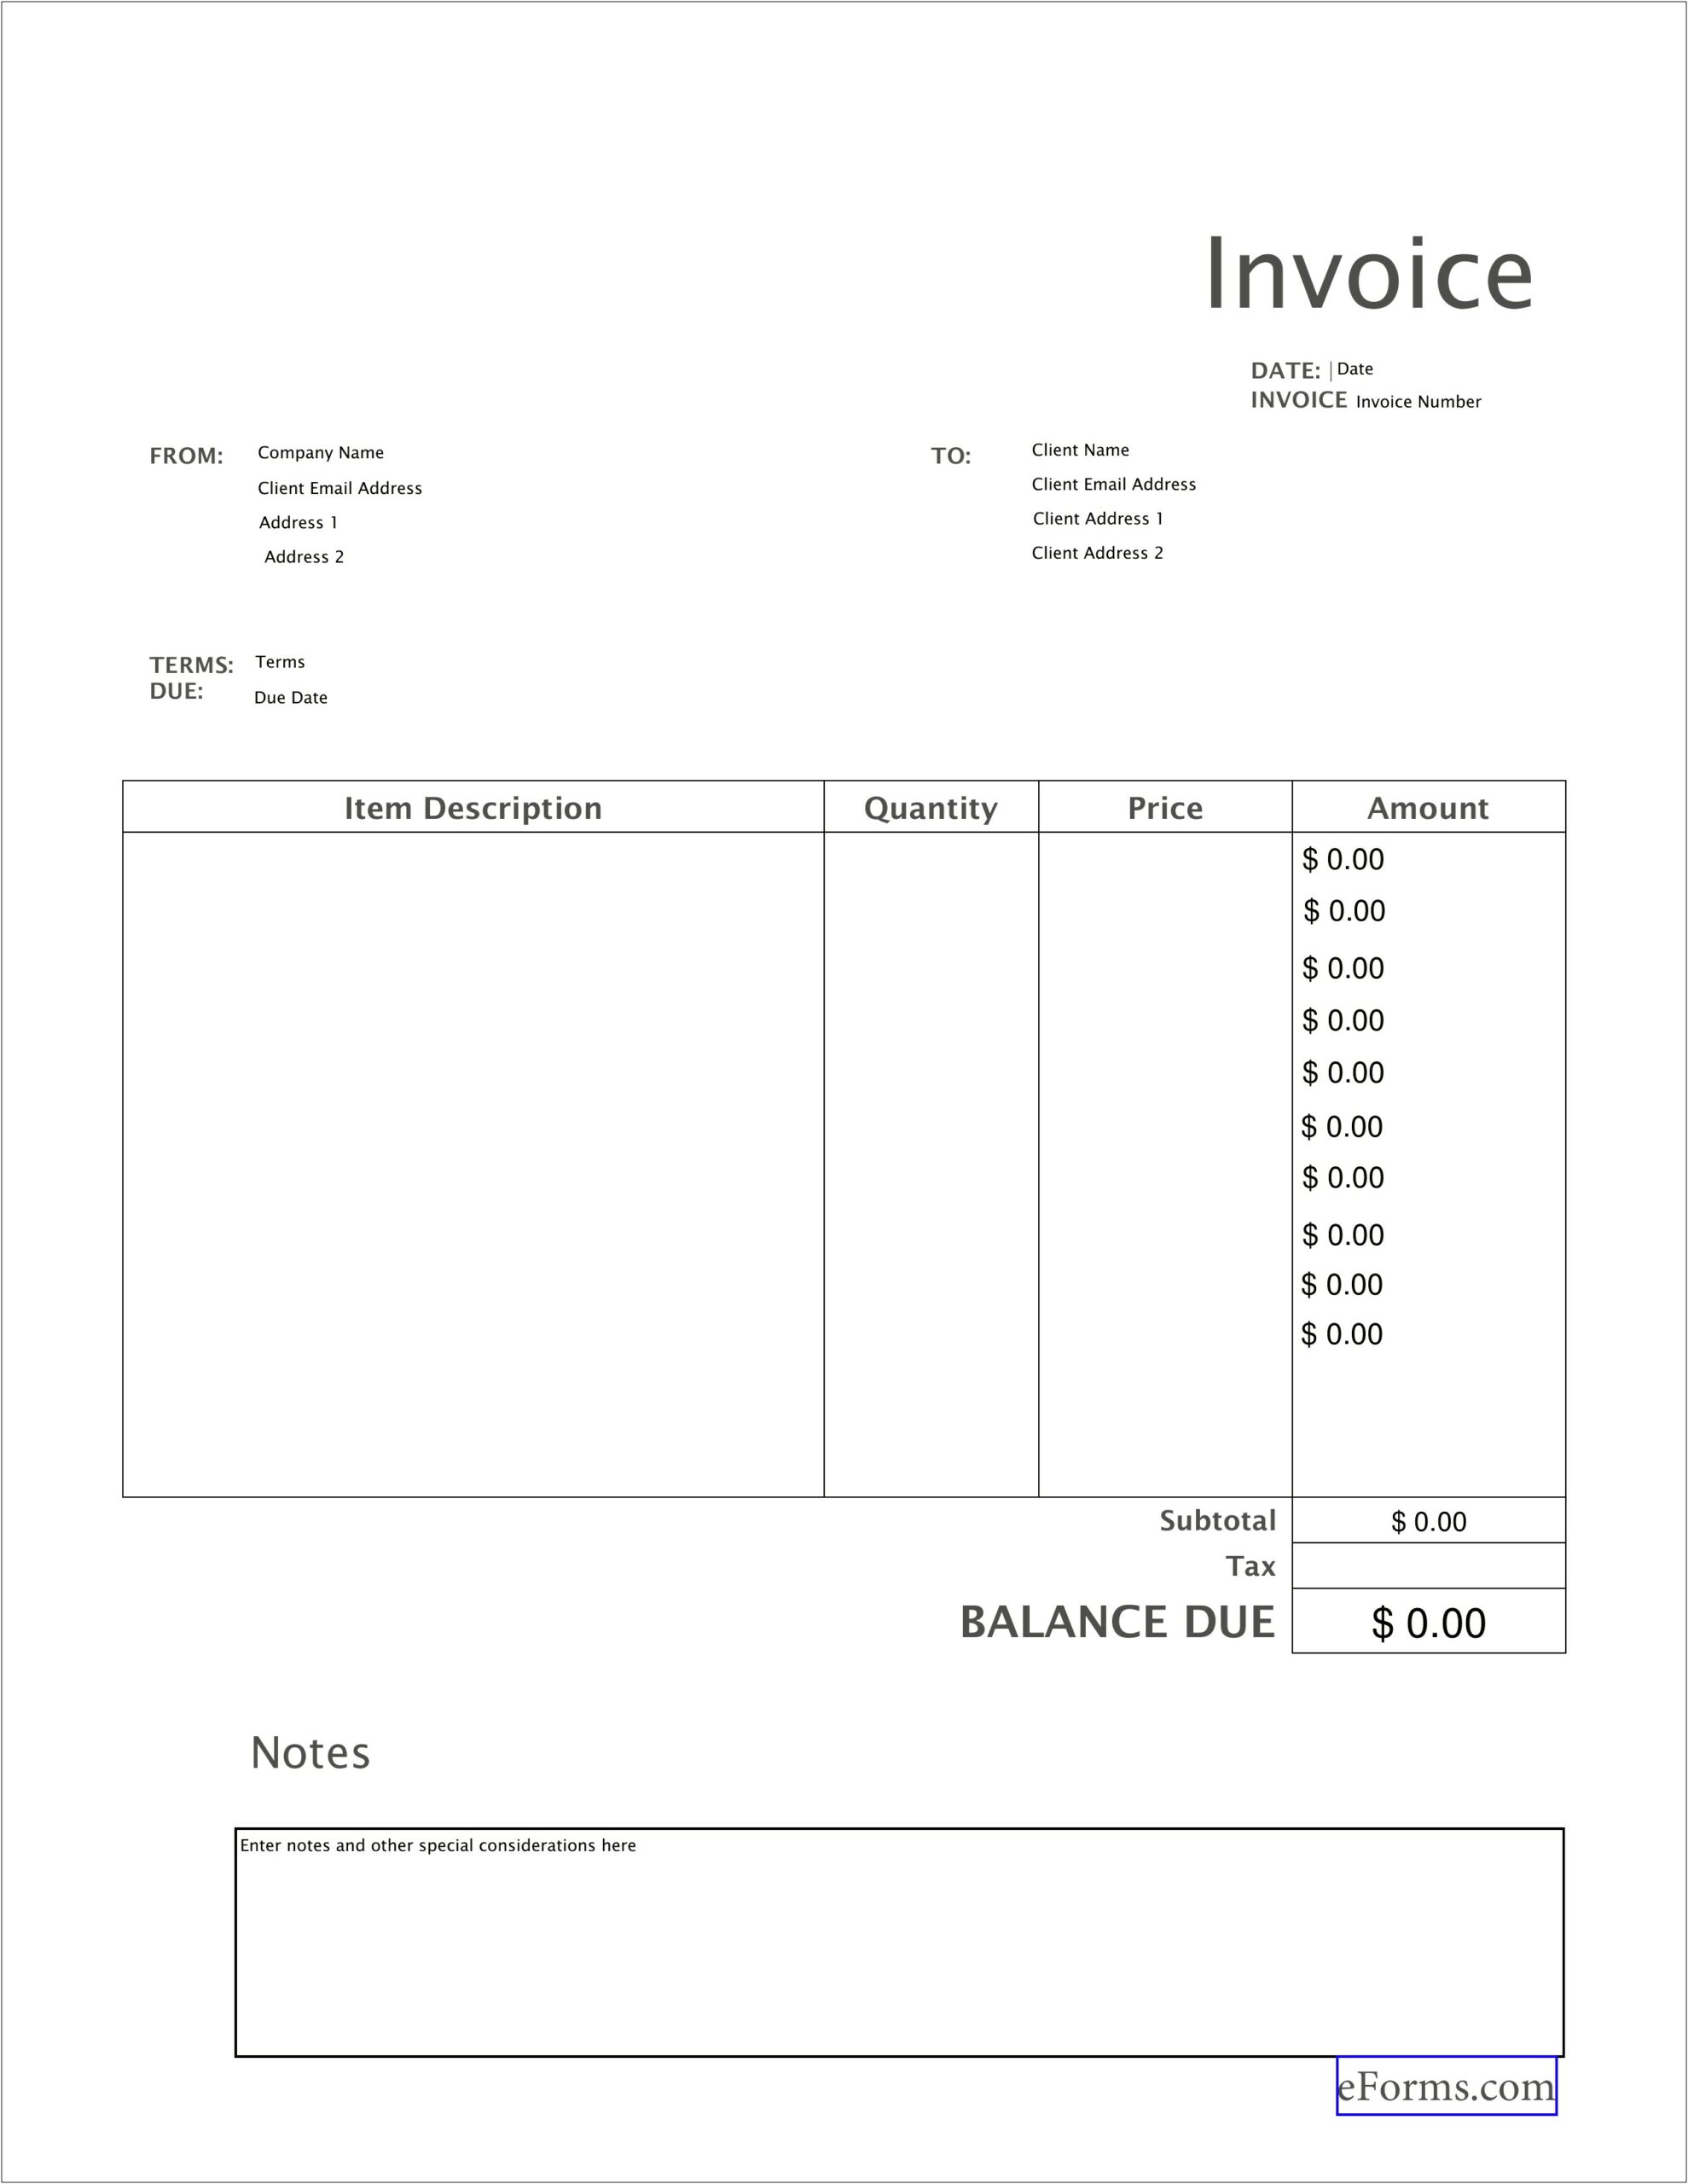 free-excel-invoice-template-south-africa-templates-resume-designs